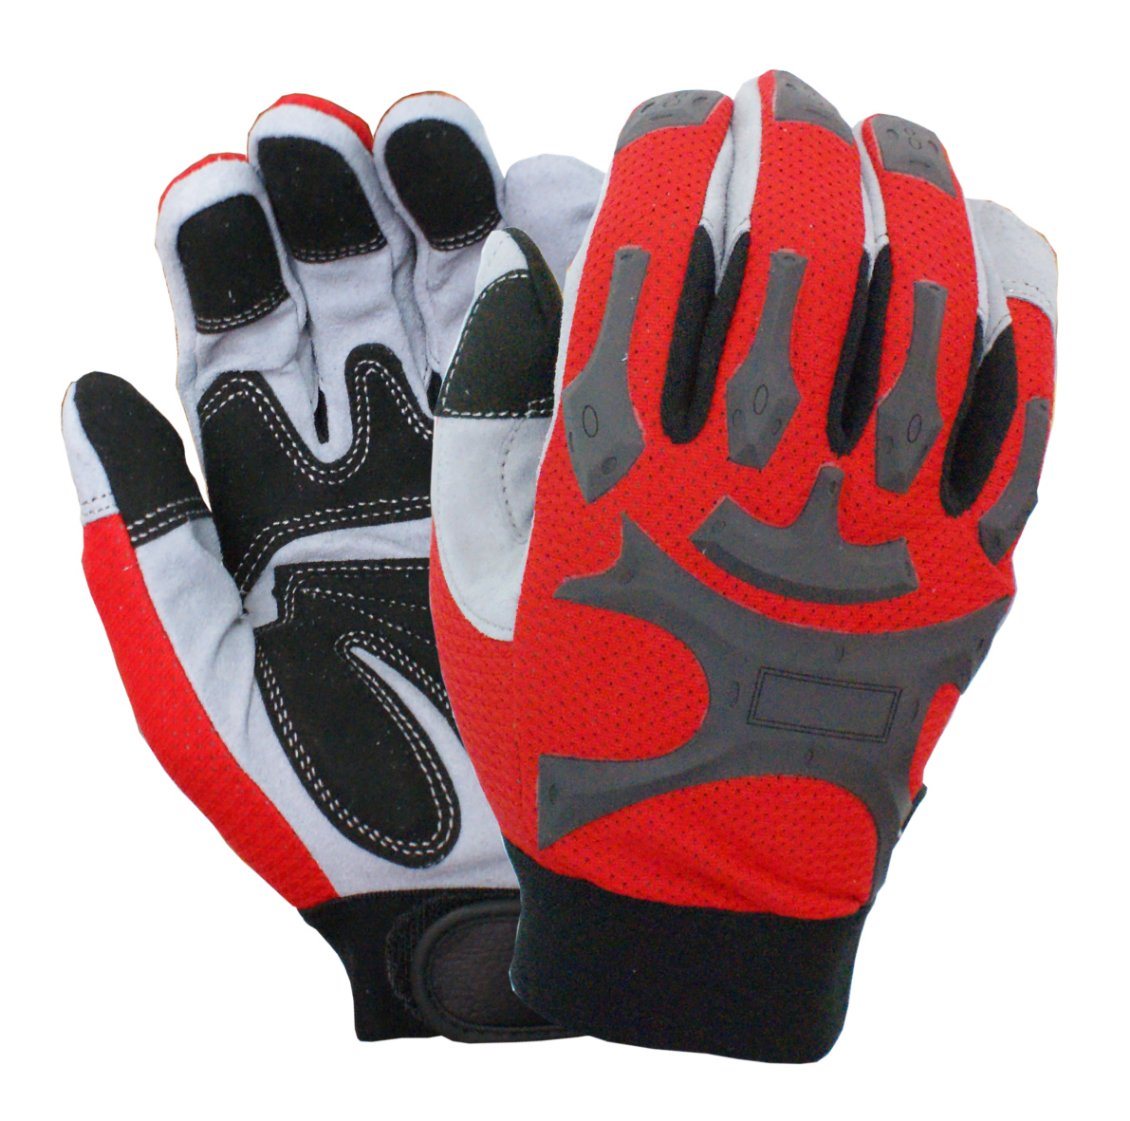 TPR Impact Resistant Mechanical Work Gloves with Microfiber Palm Padding